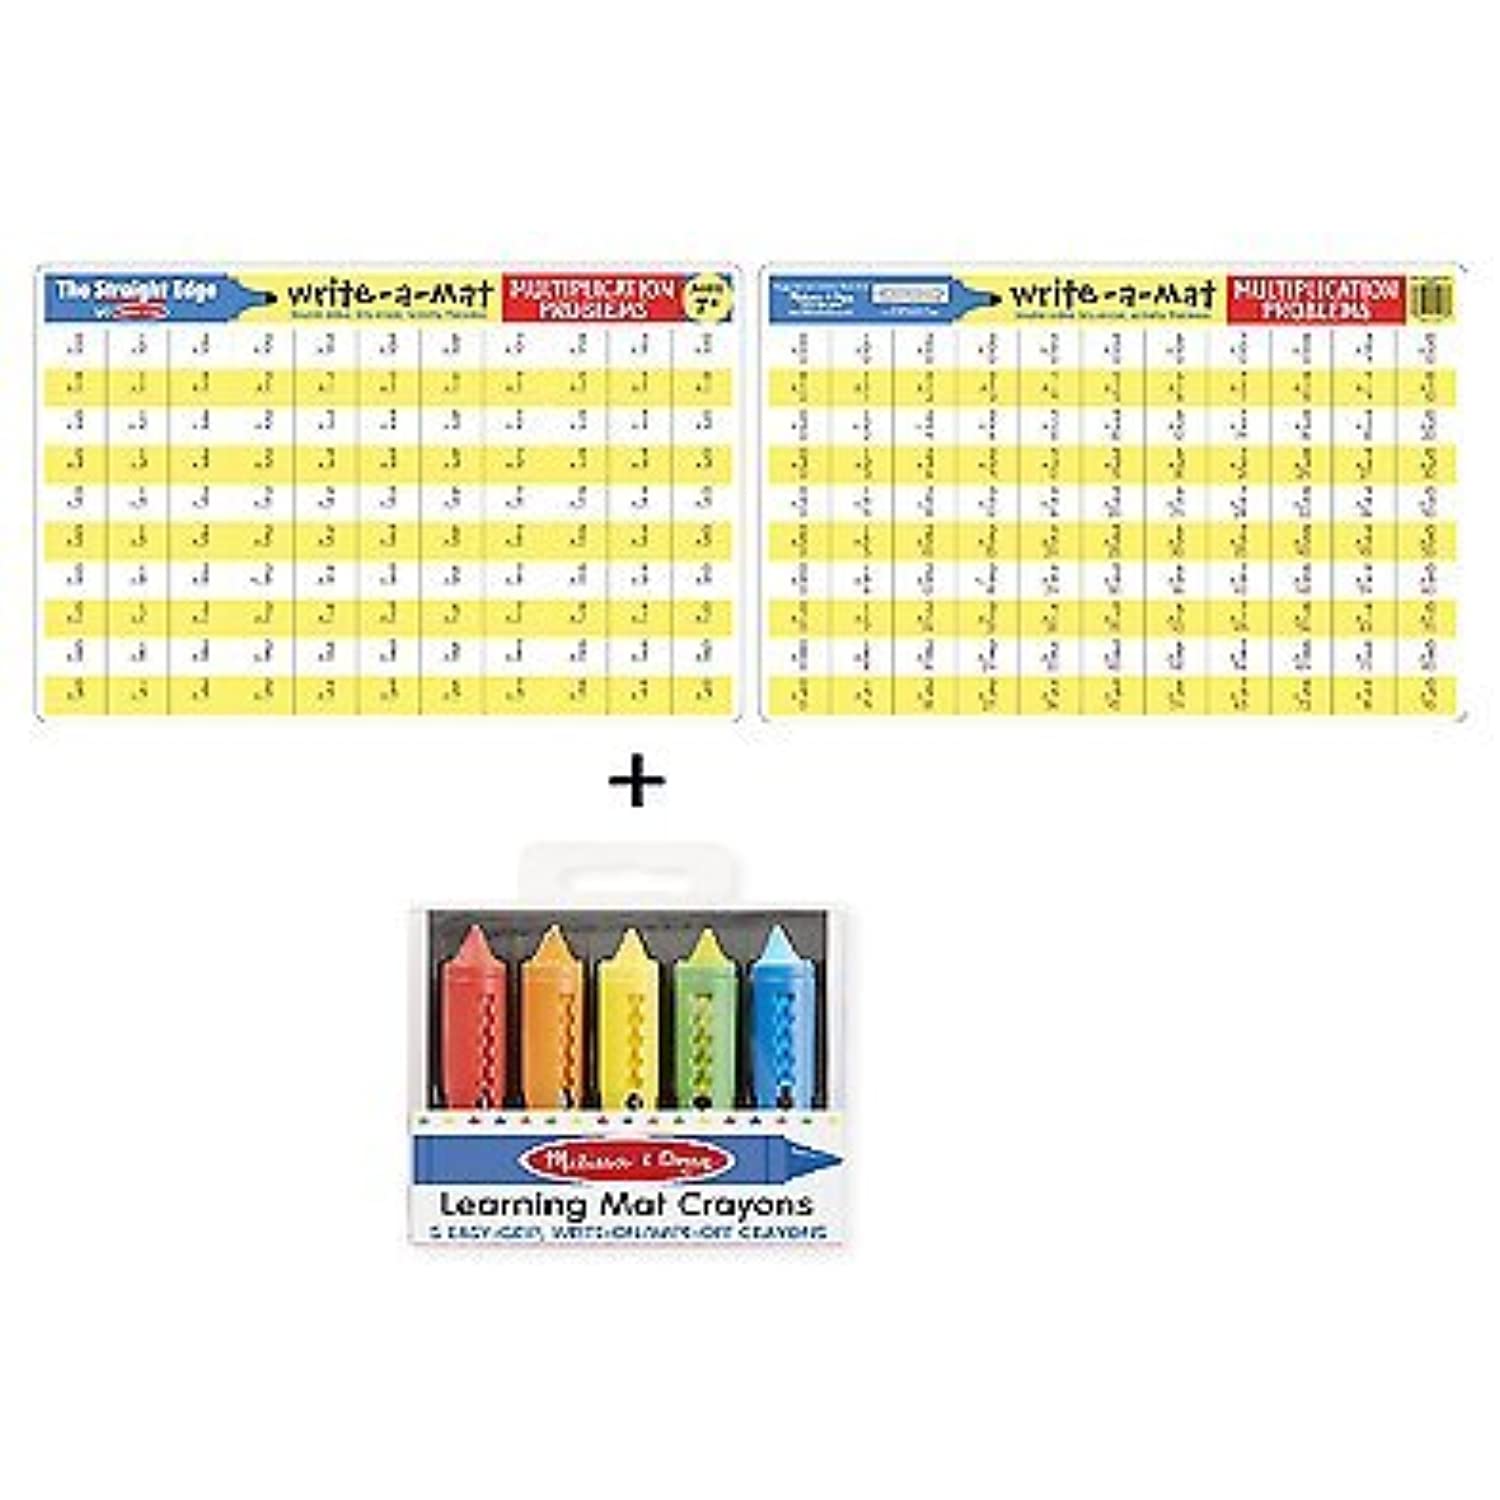 Learning Mat Multiplication and Crayon Set from Little Folks